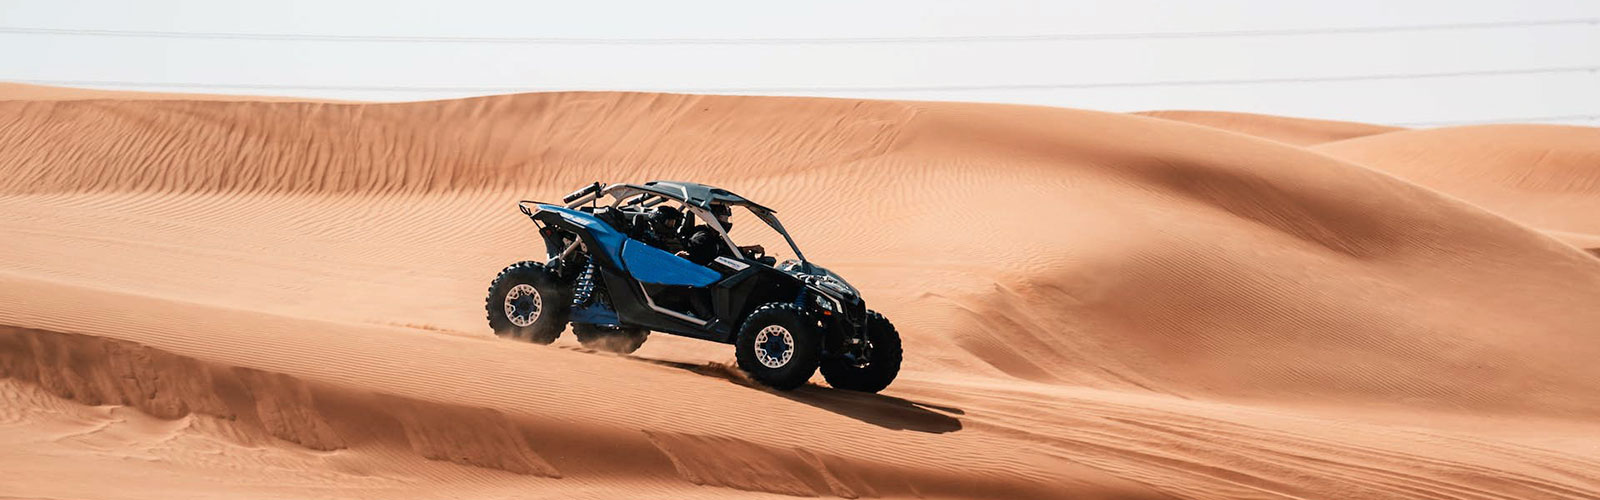 Blue Dune Buggy driving across sand dunes on a sunny day